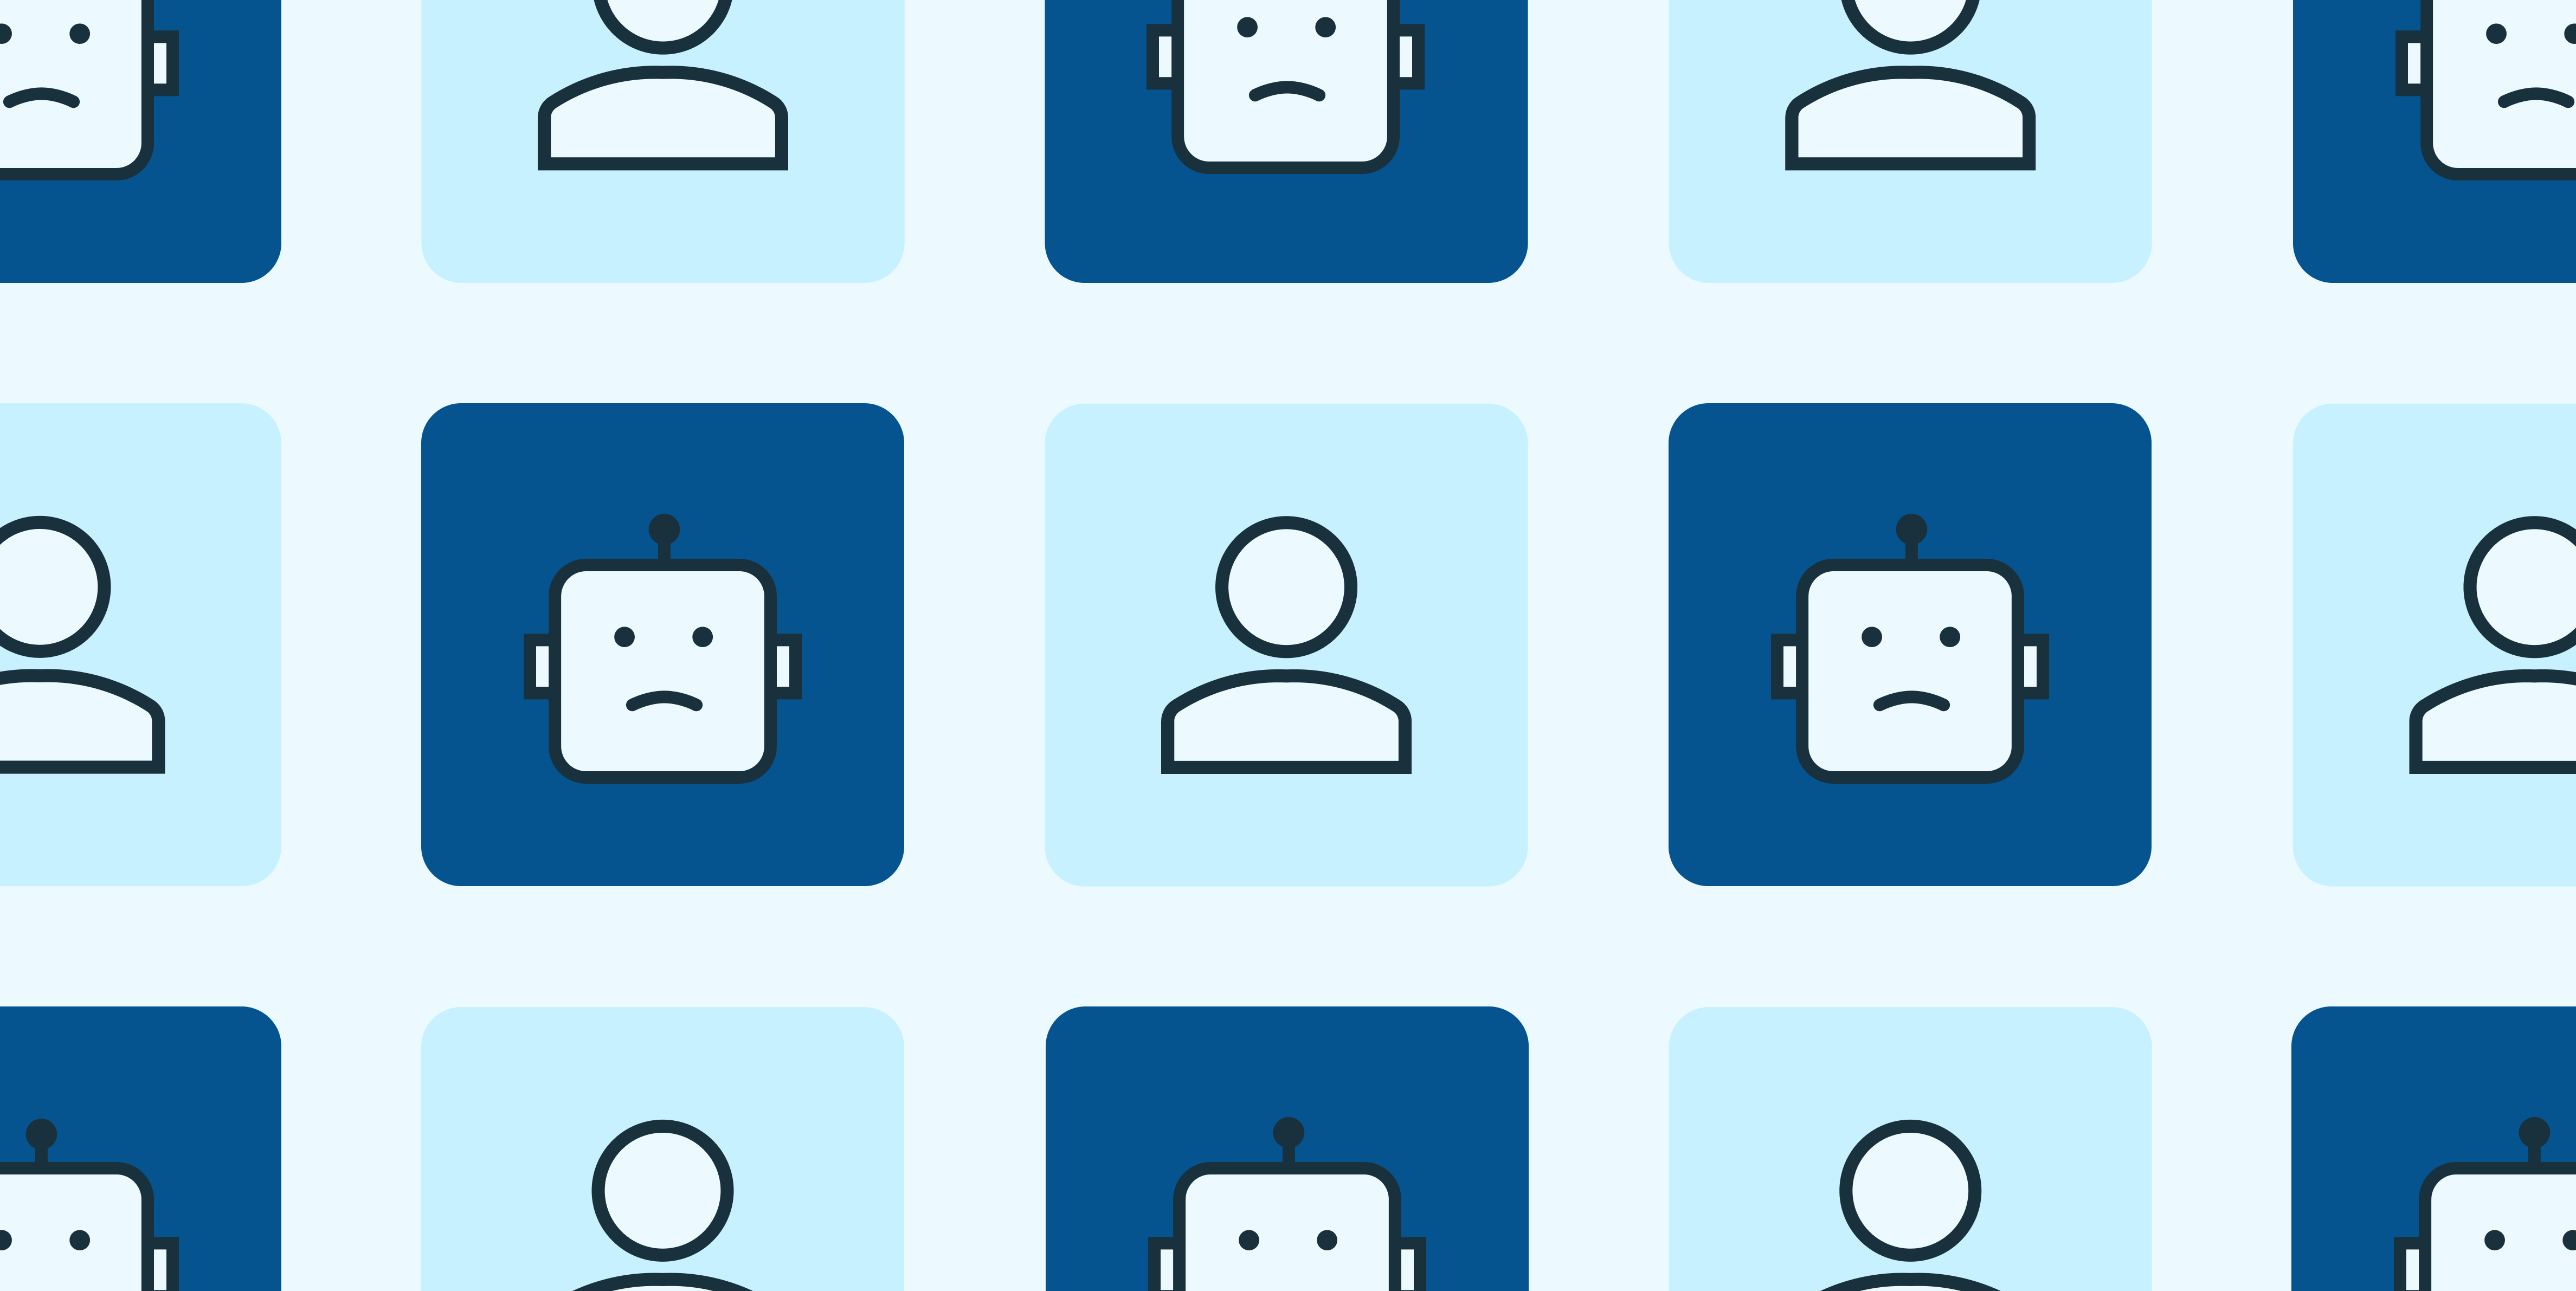 A collage array of icons representing users and icons representing bots